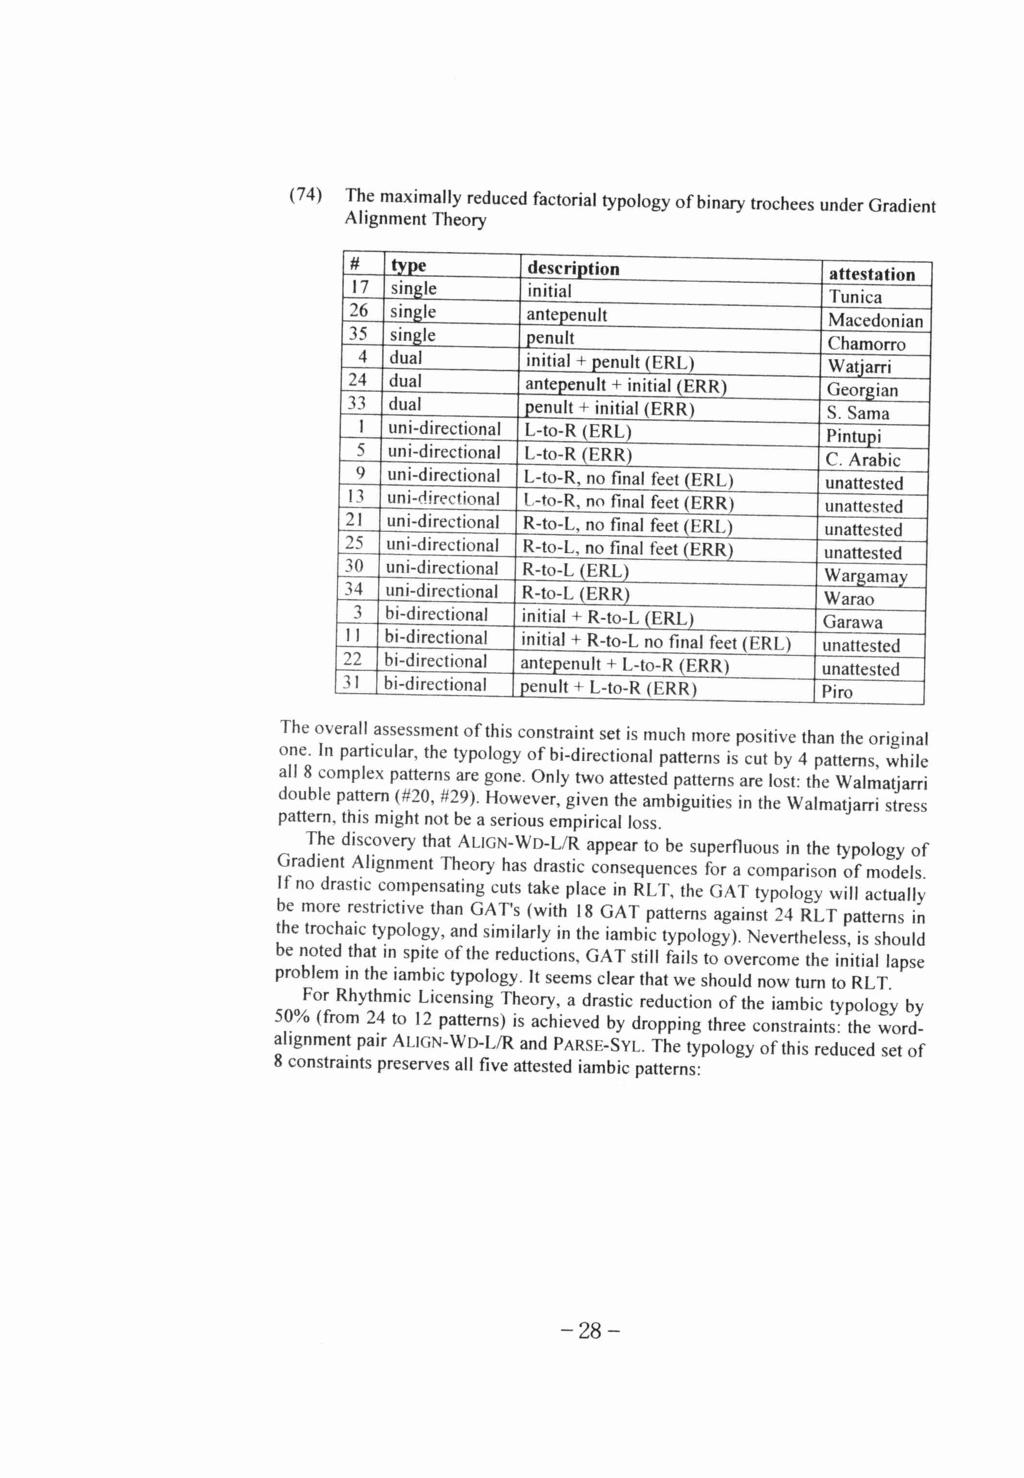 (74) The maximally reduced factorial typology of binary trochees under Gradient Alignment Theory # type description attestation 17 single initial Tunica 26 single antepenult Macedonian 35 single